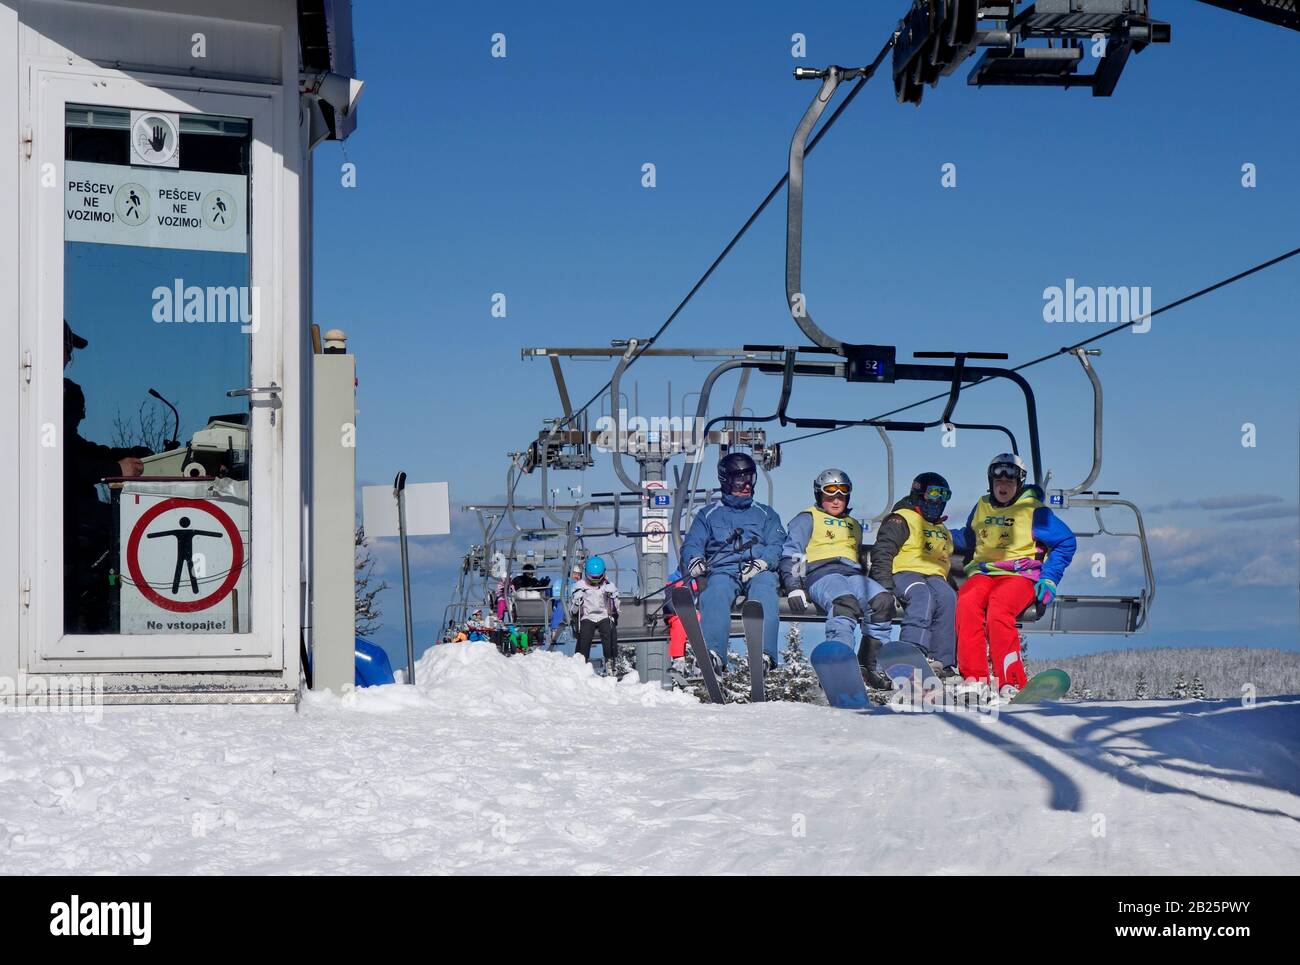 Skiers are about to get off the Ski Chairlift at Platform Station, Rogla ski resort, Slovenia Stock Photo